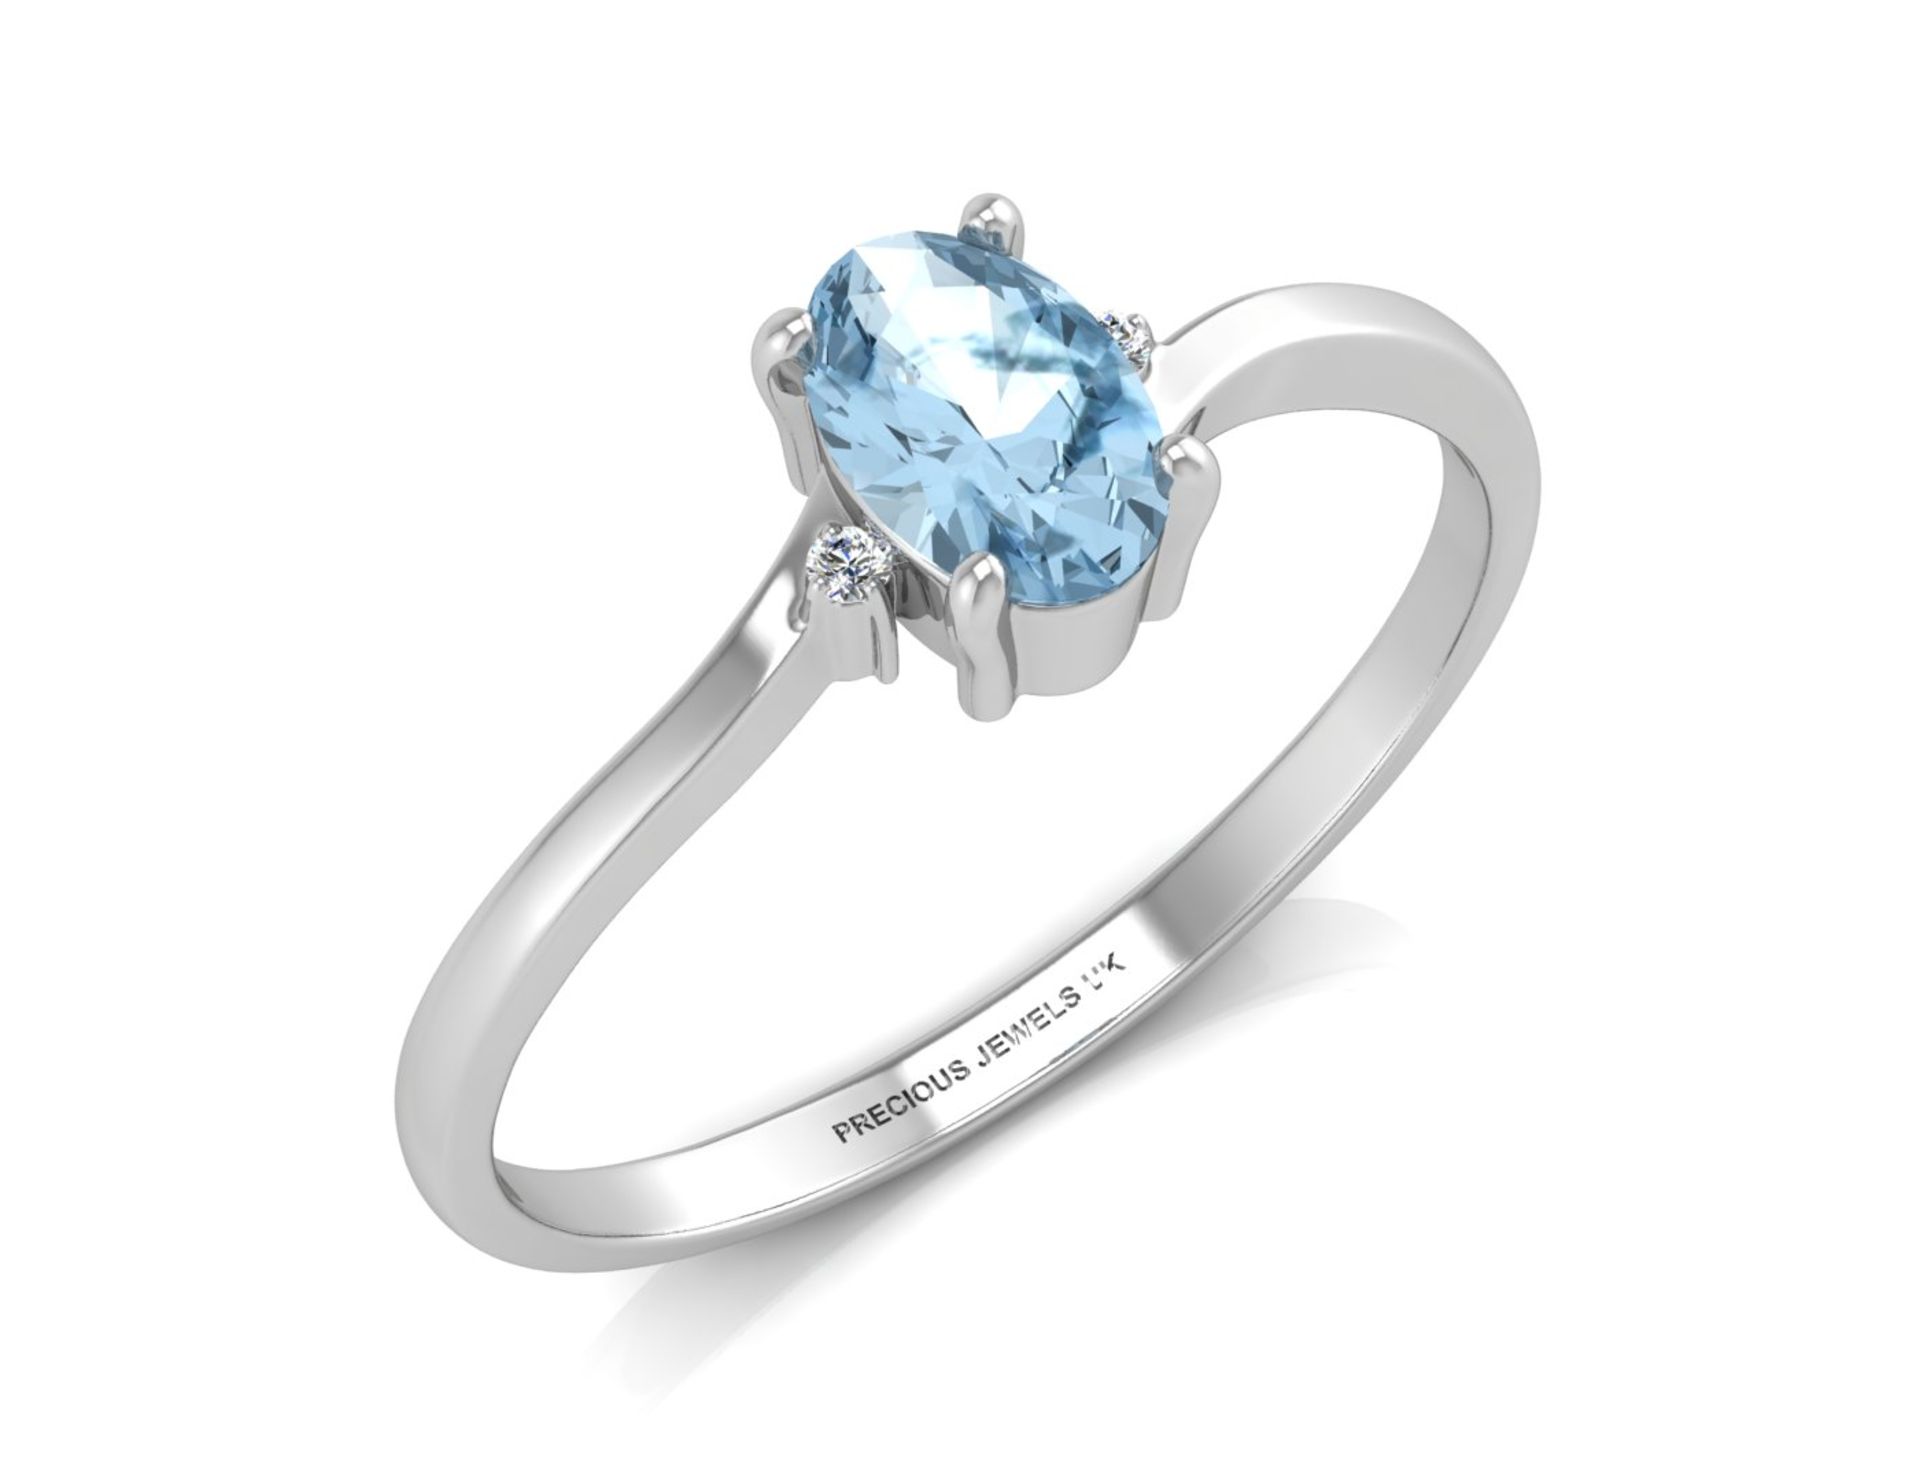 9ct White Gold Diamond and Oval Shape Blue Topaz Ring 0.01 Carats - Valued by AGI £650.00 - 9ct - Image 3 of 8